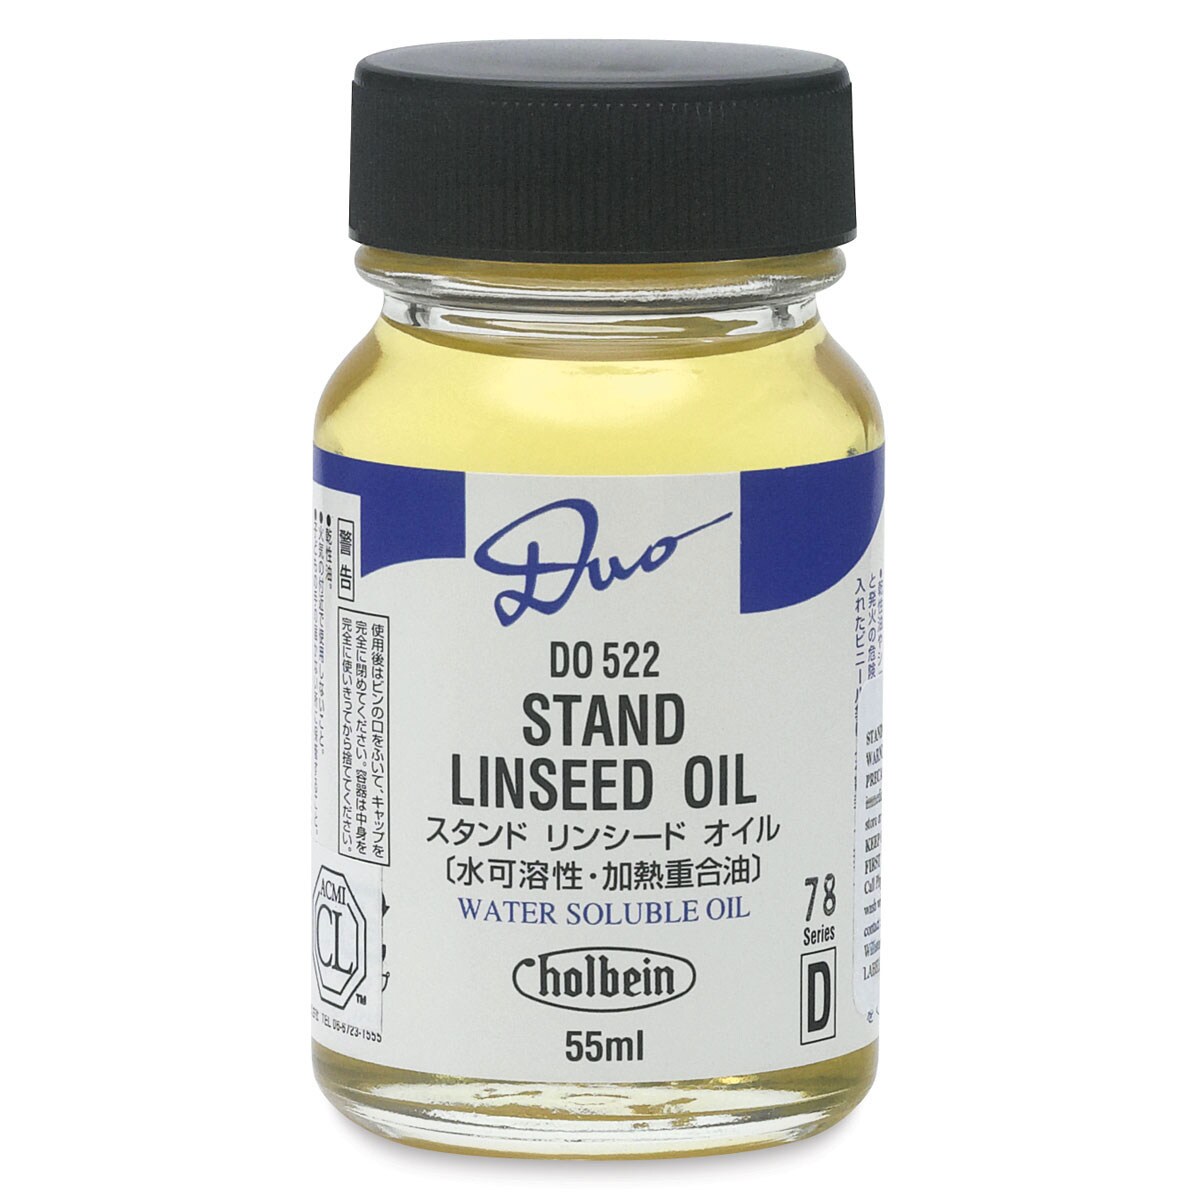 Holbein Duo Aqua Oil Stand Linseed Oil - 55 ml bottle